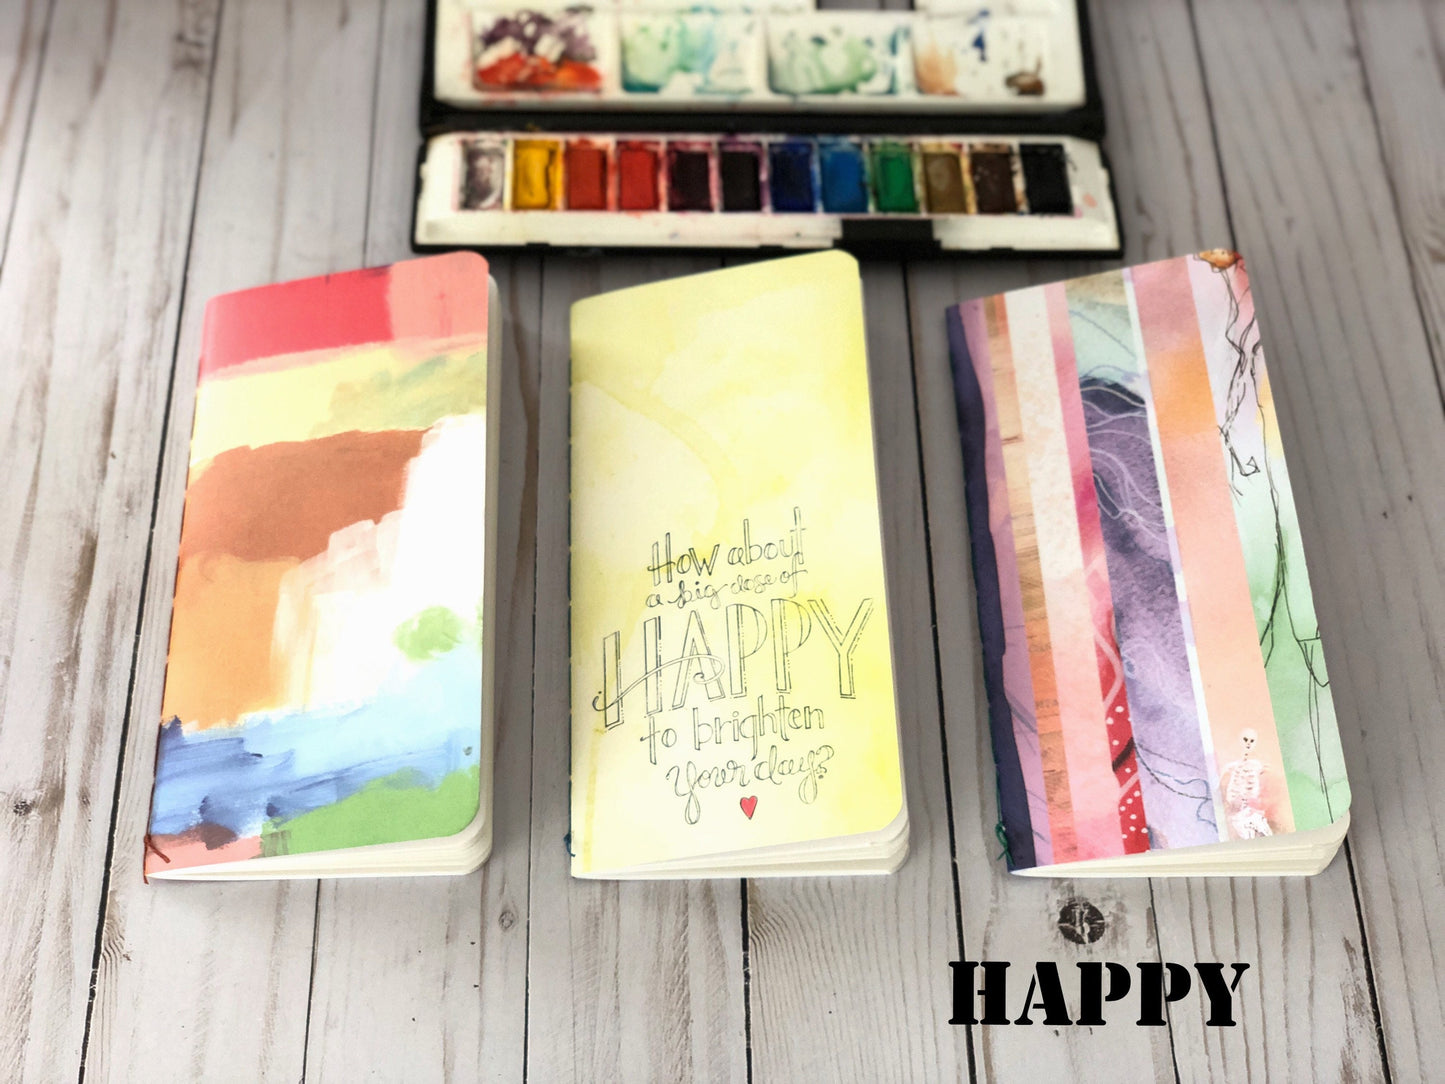 Journal Bundle 140gsm Fabriano Watercolor, Travelers Notebook Refill Inserts, Pocket Sketchbook, Office Gifts for artists, Mini Art Journal